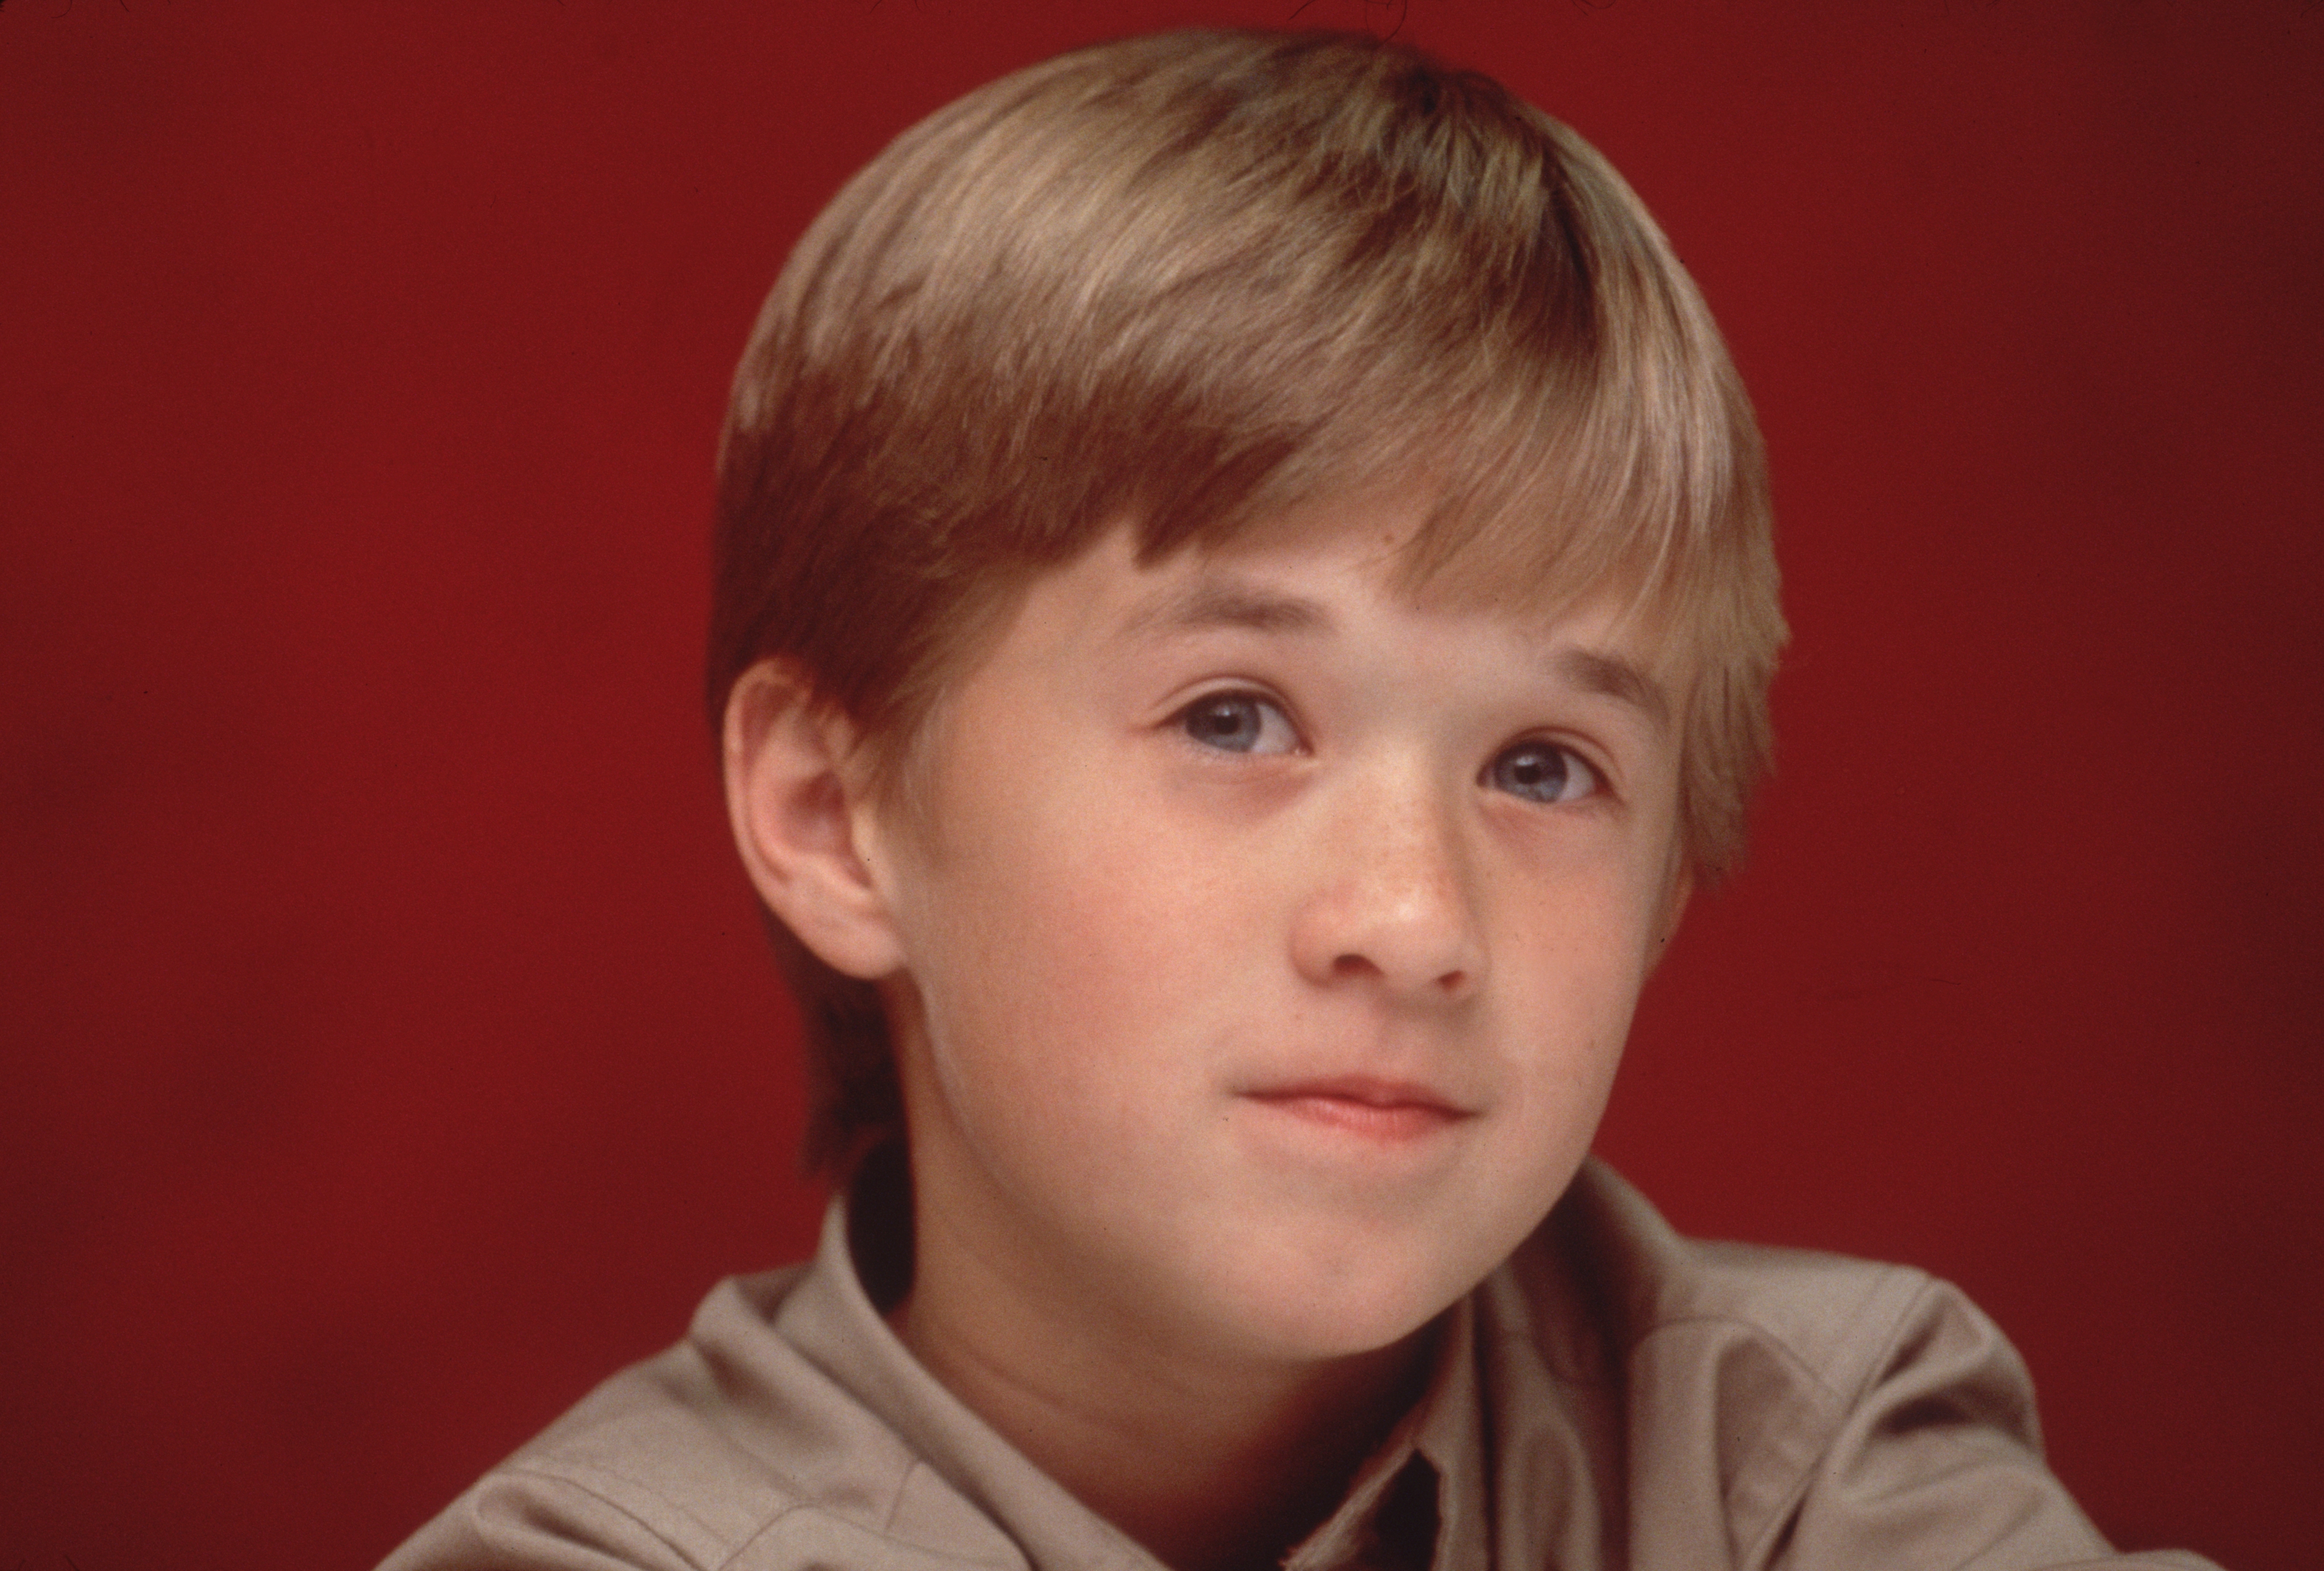 A headshot of Haley Osment on September 25, 1999 in Beverly Hills, California. | Source: Getty Images